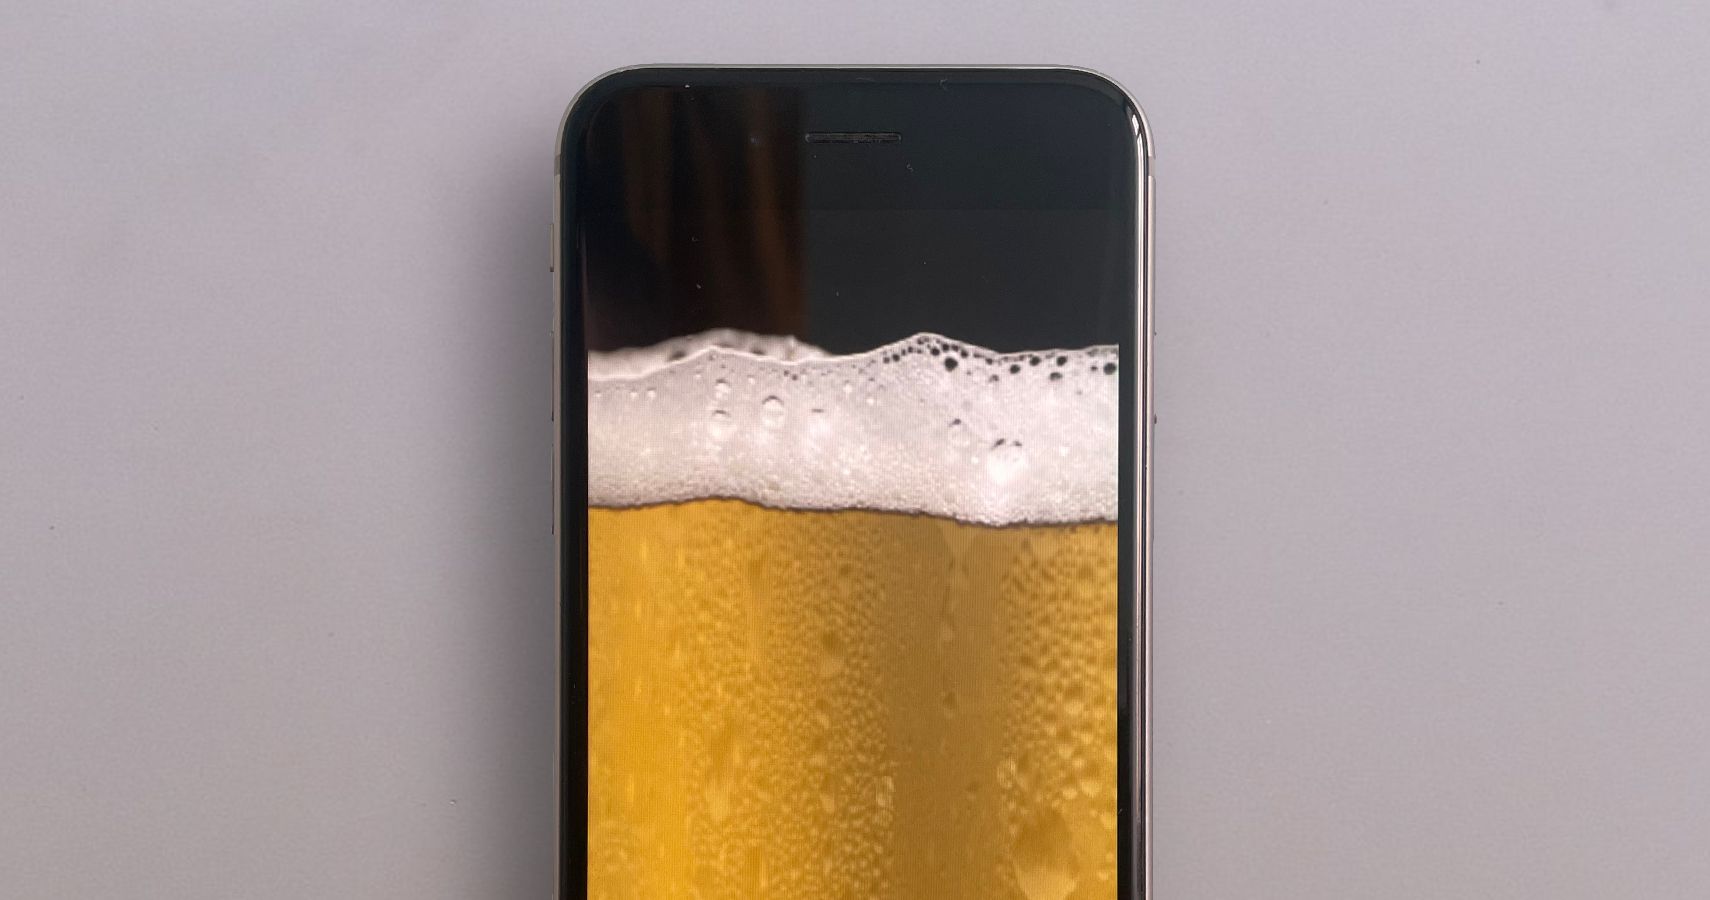 A Developer Who Made The Original iBeer App Earned $20,000 A Day At Its Peak